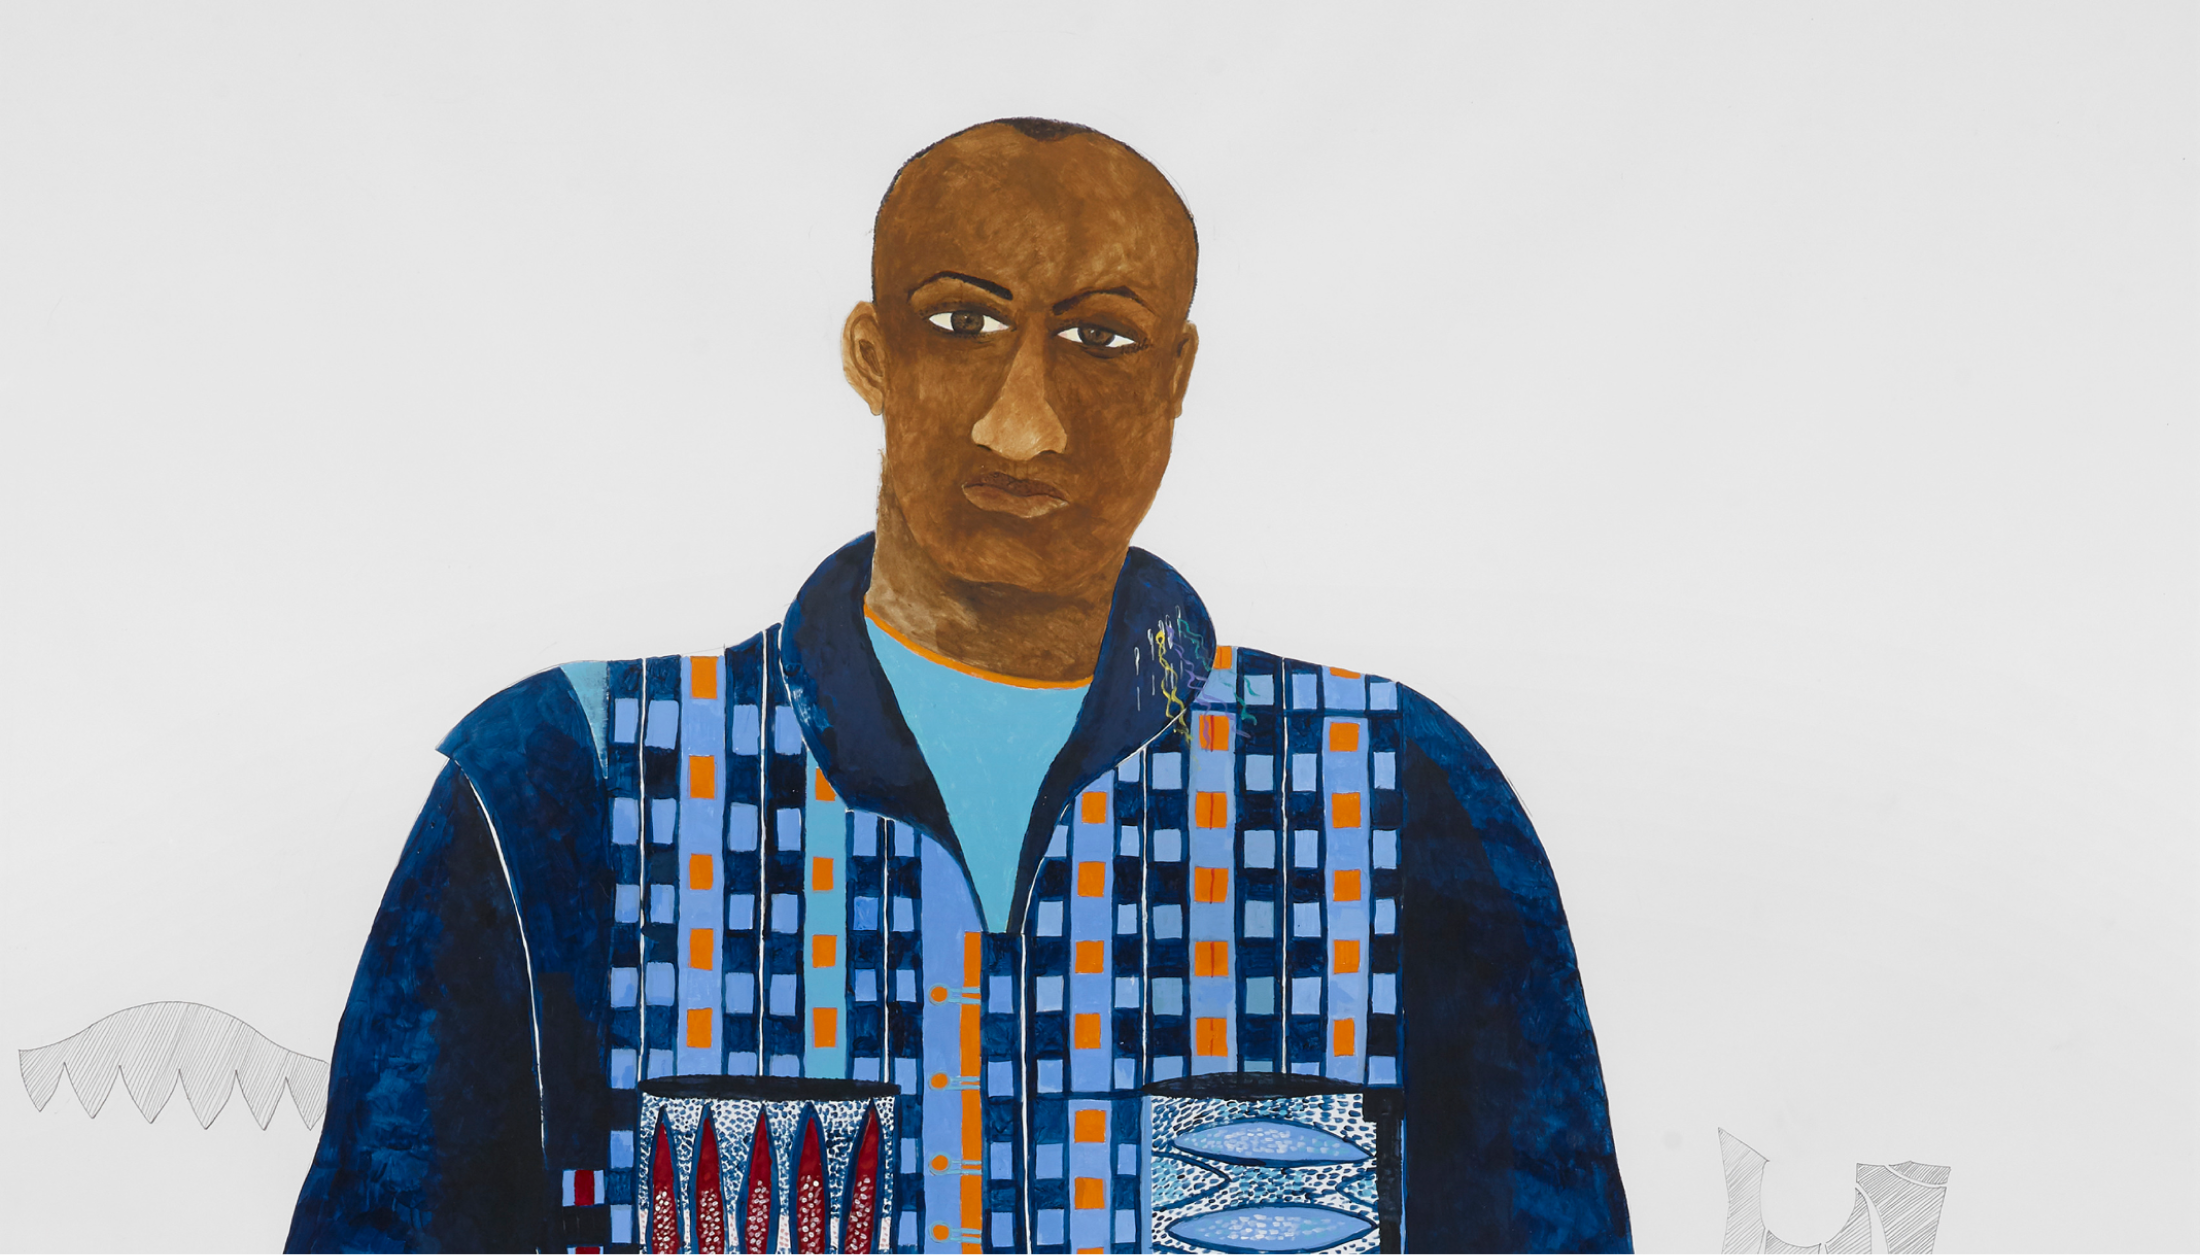 A detail from <i>The Tailor</i>, 2010, acrylic on paper by Lubaina Himid (b.1954) © the artist. Image credit: Manchester Art Gallery